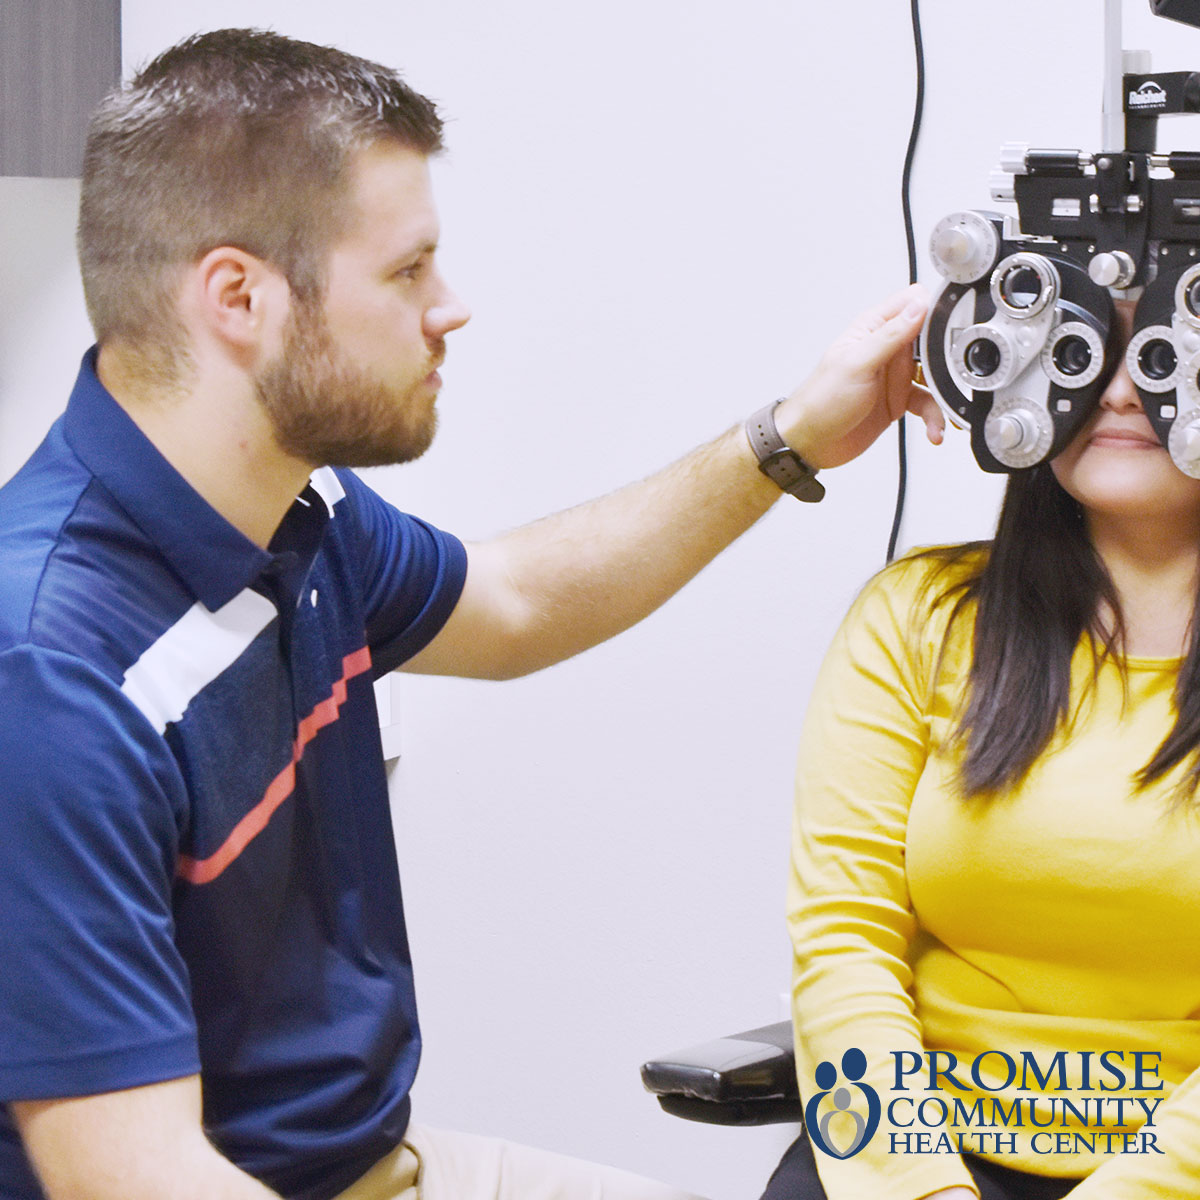 Dr. Aric Waltz, Optometrist |Promise Community Health Center in Sioux Center, Iowa | Federally Qualified Health Center serving northwest Iowa | Promise offers medical care, prenatal care, behavioral healthcare, population health care, health coaching as well as dental and vision care.